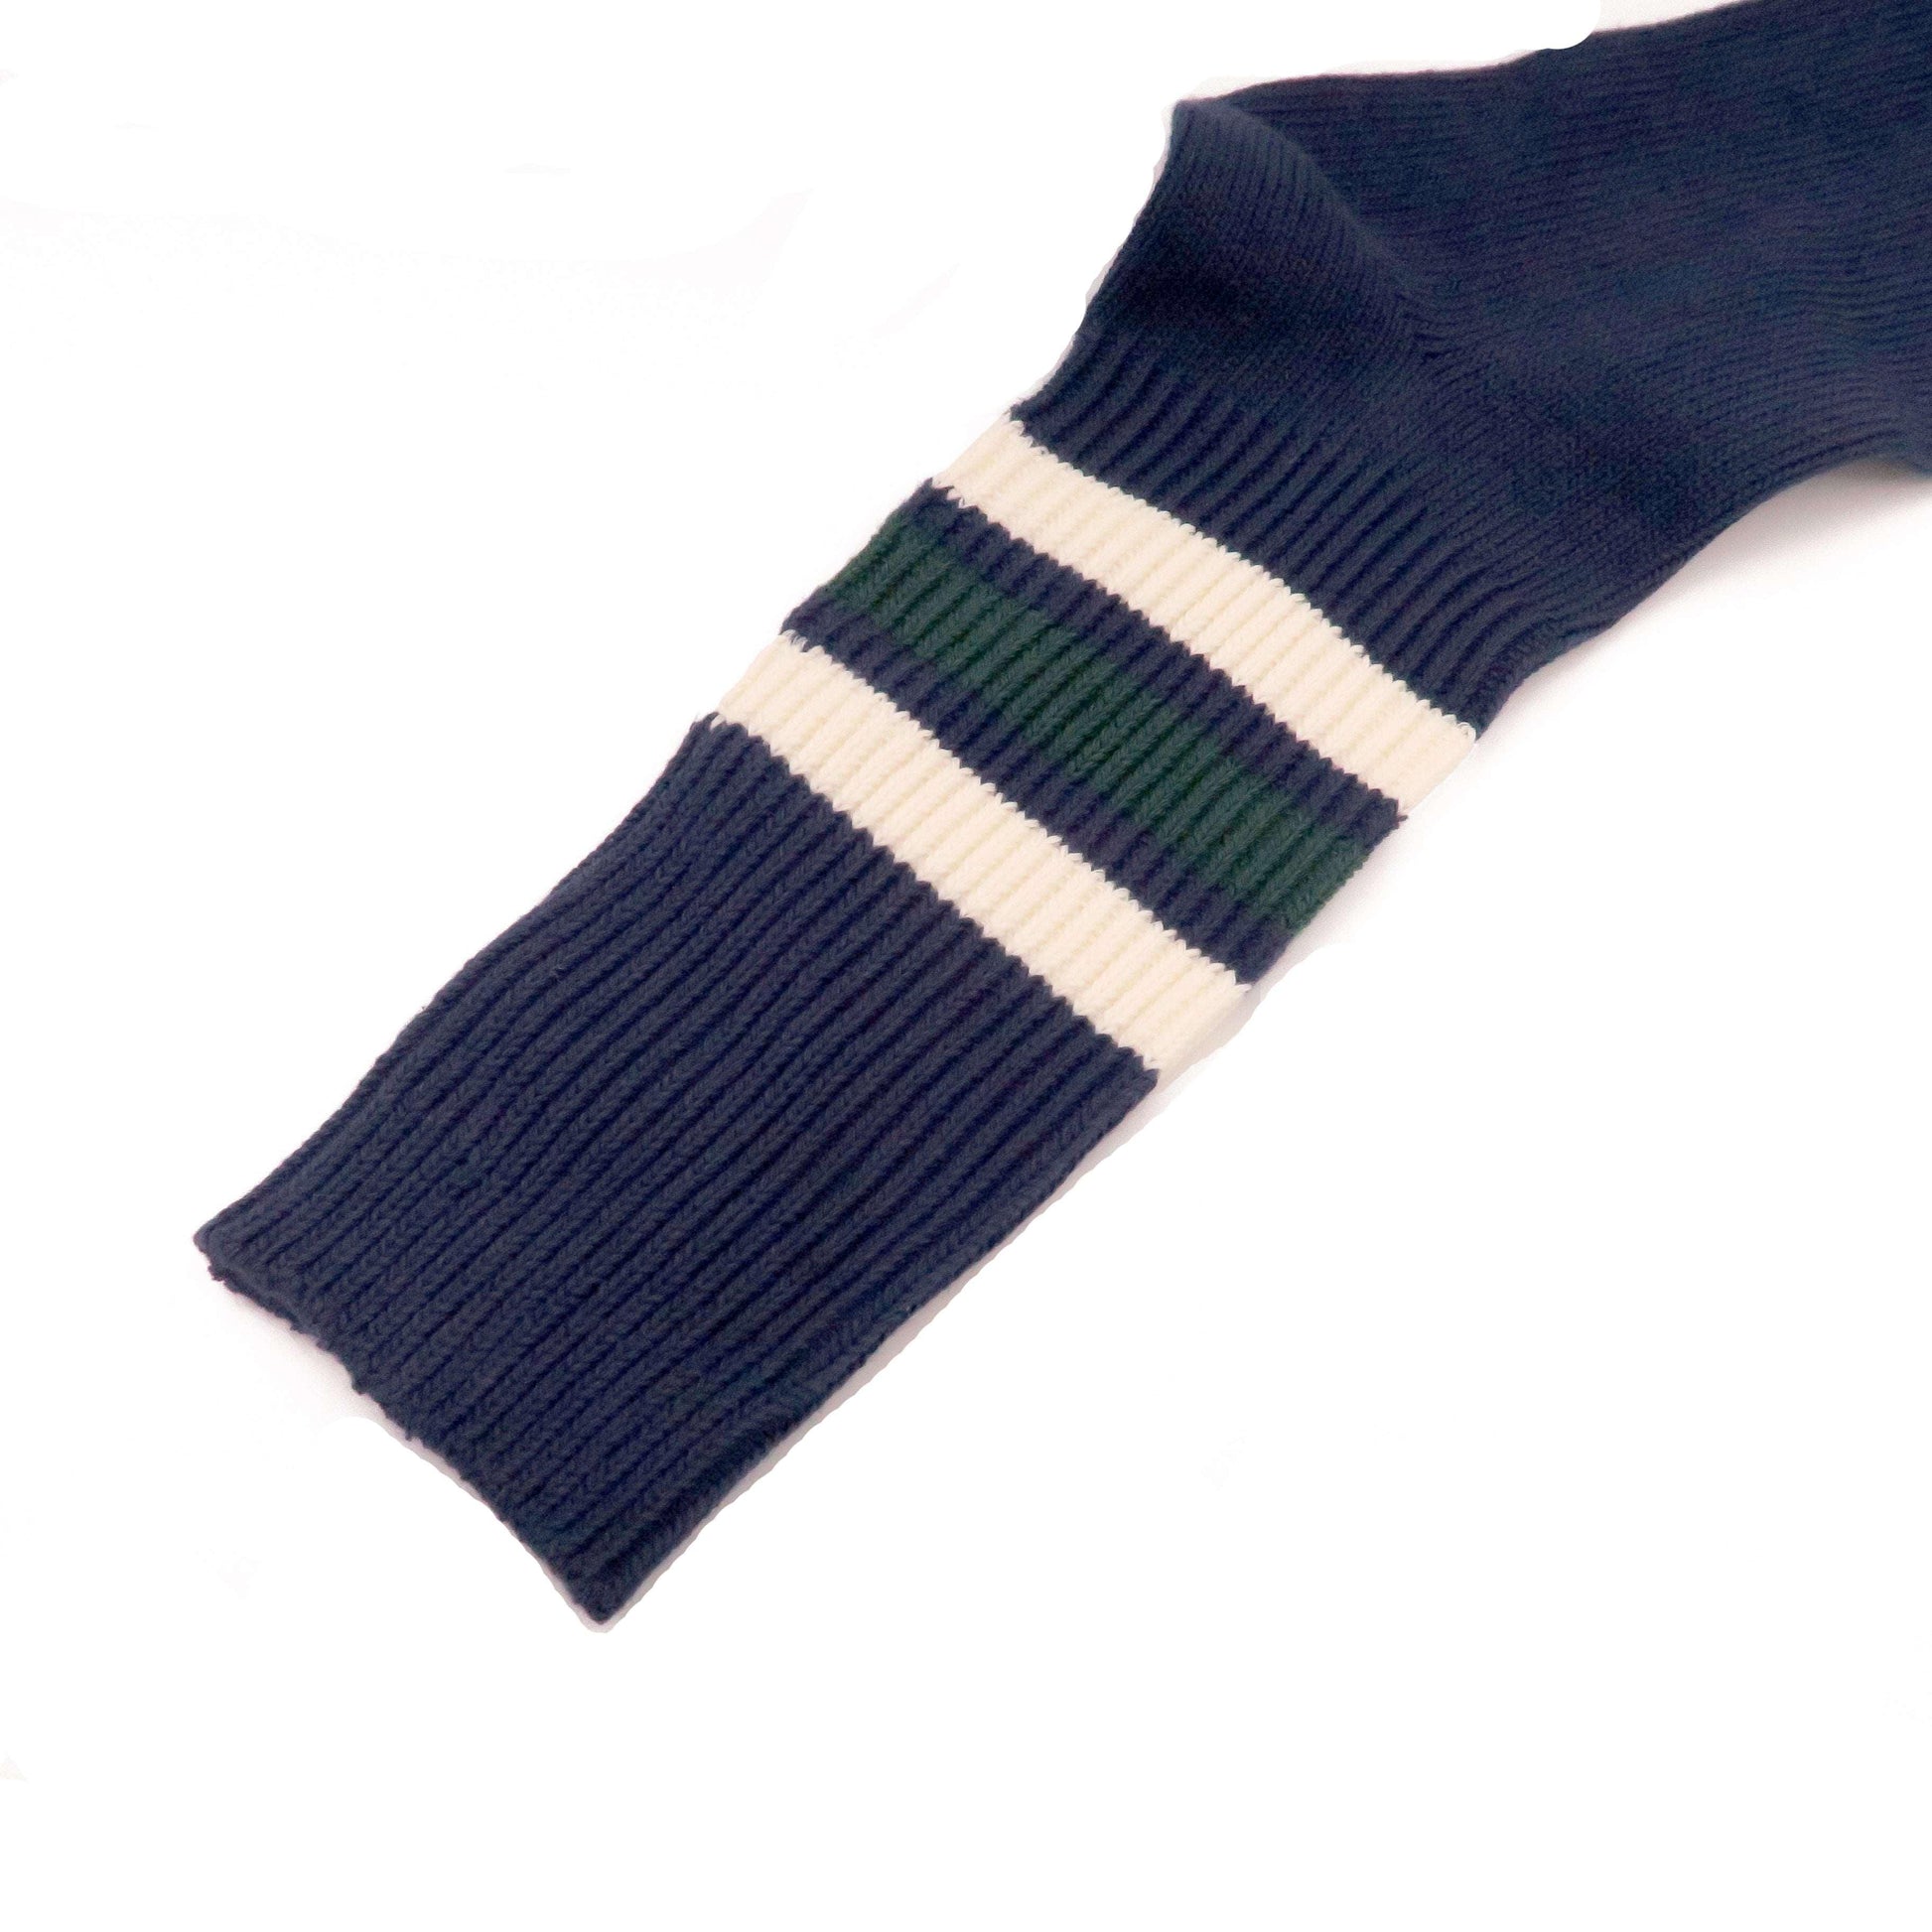 old school green and white striped navy socks